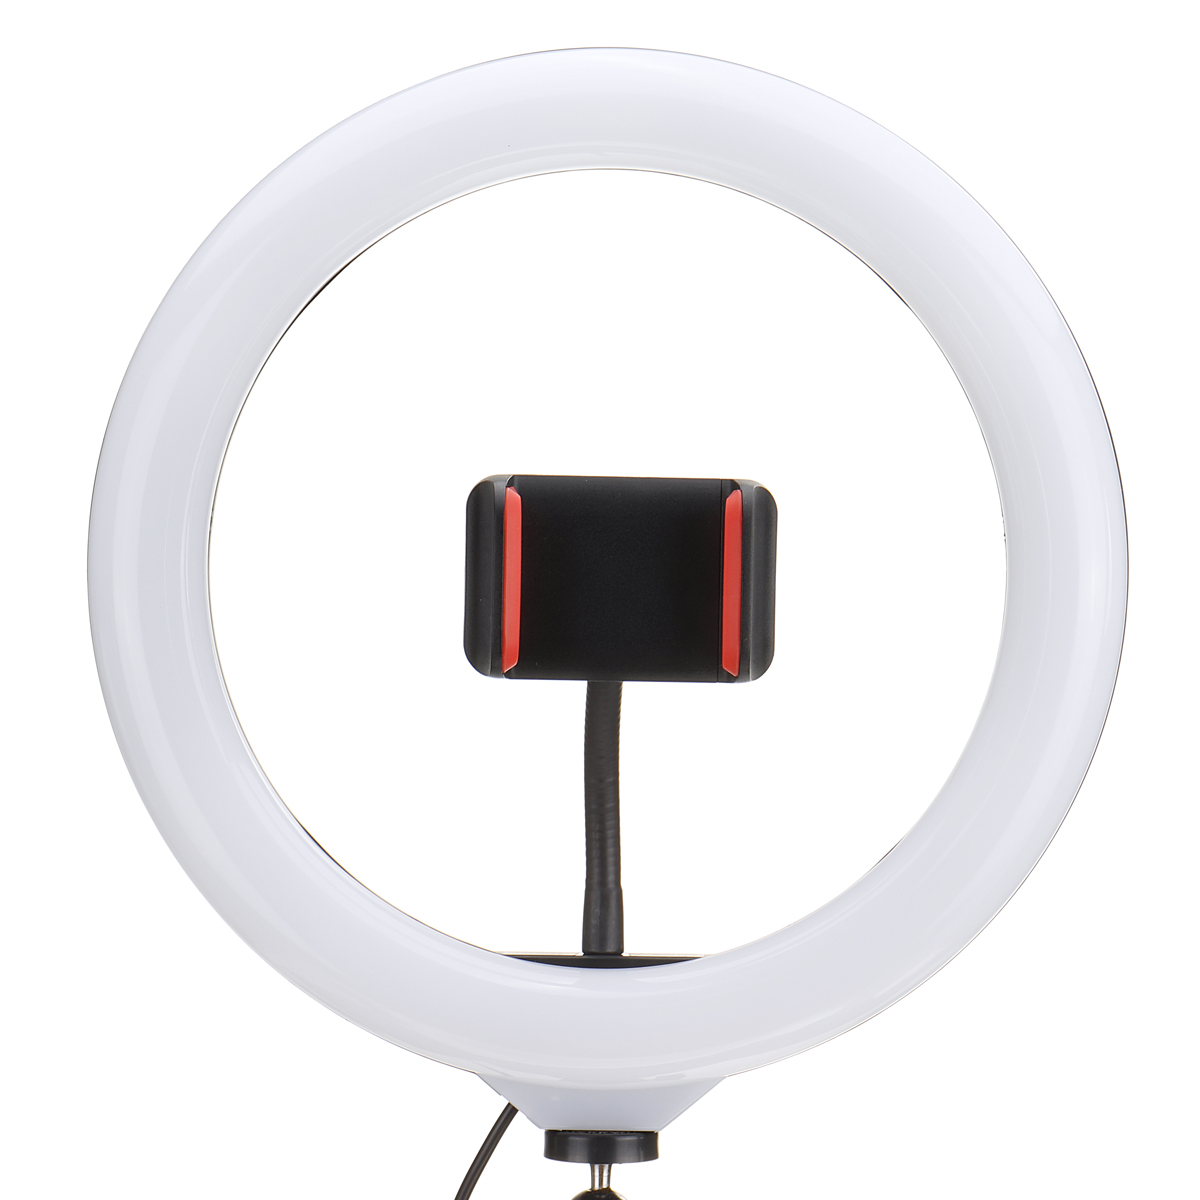 Bakeey-10inch-LED-Ring-Light-Portable-Telescopic-Tripod-Fill-Light-Dimmable-Flexible-Stand-Phone-Hol-1746941-6